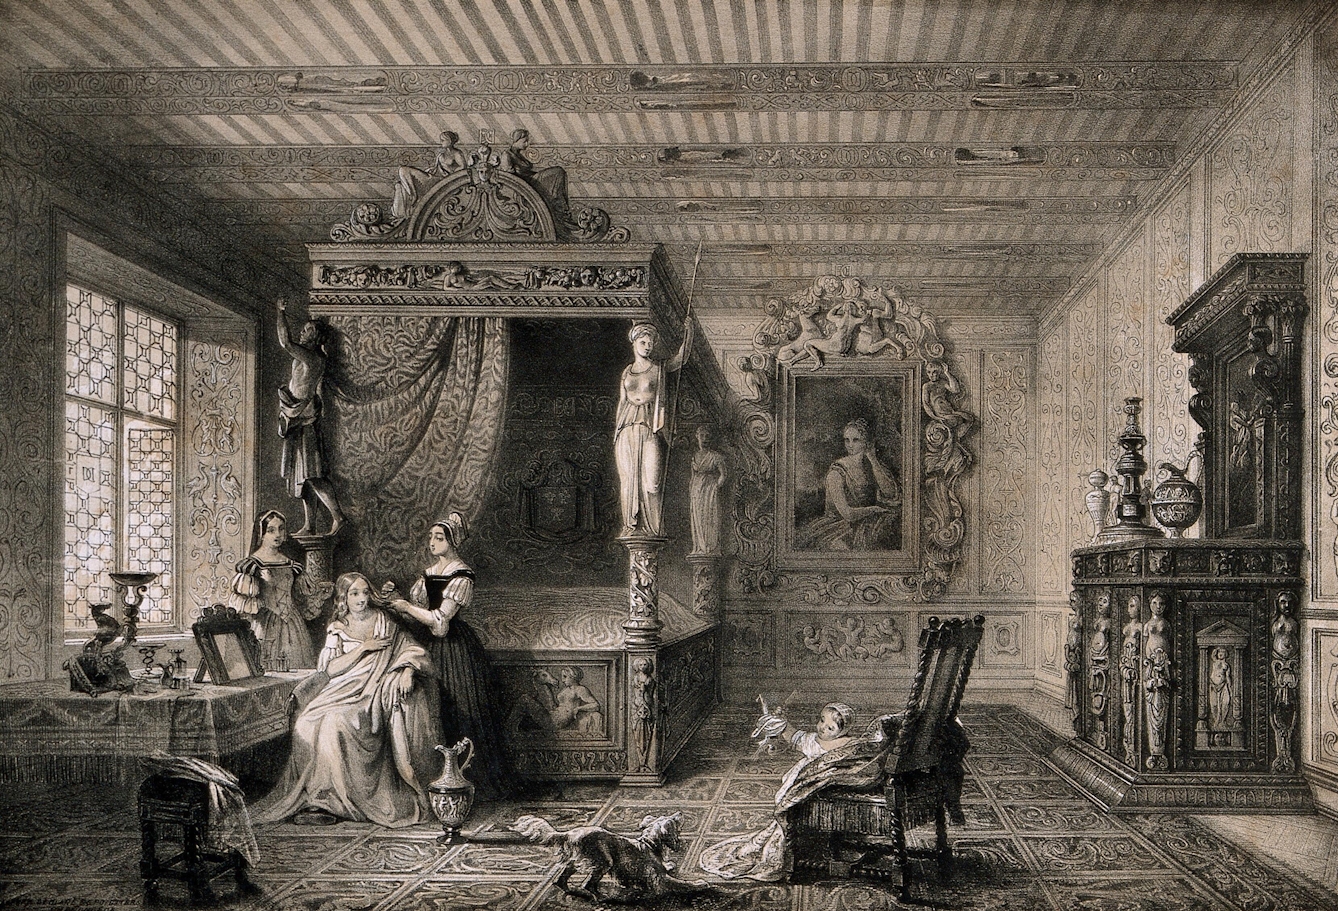 Lithograph of Diane de Poitiers in her bed-chamber in the Château de Chenonceau. A female assistant is dressing her hair, whilst another woman stands on Diane's left. In the foreground a small child and dog are playing. The bed-chamber is grand and ornamental-looking. 